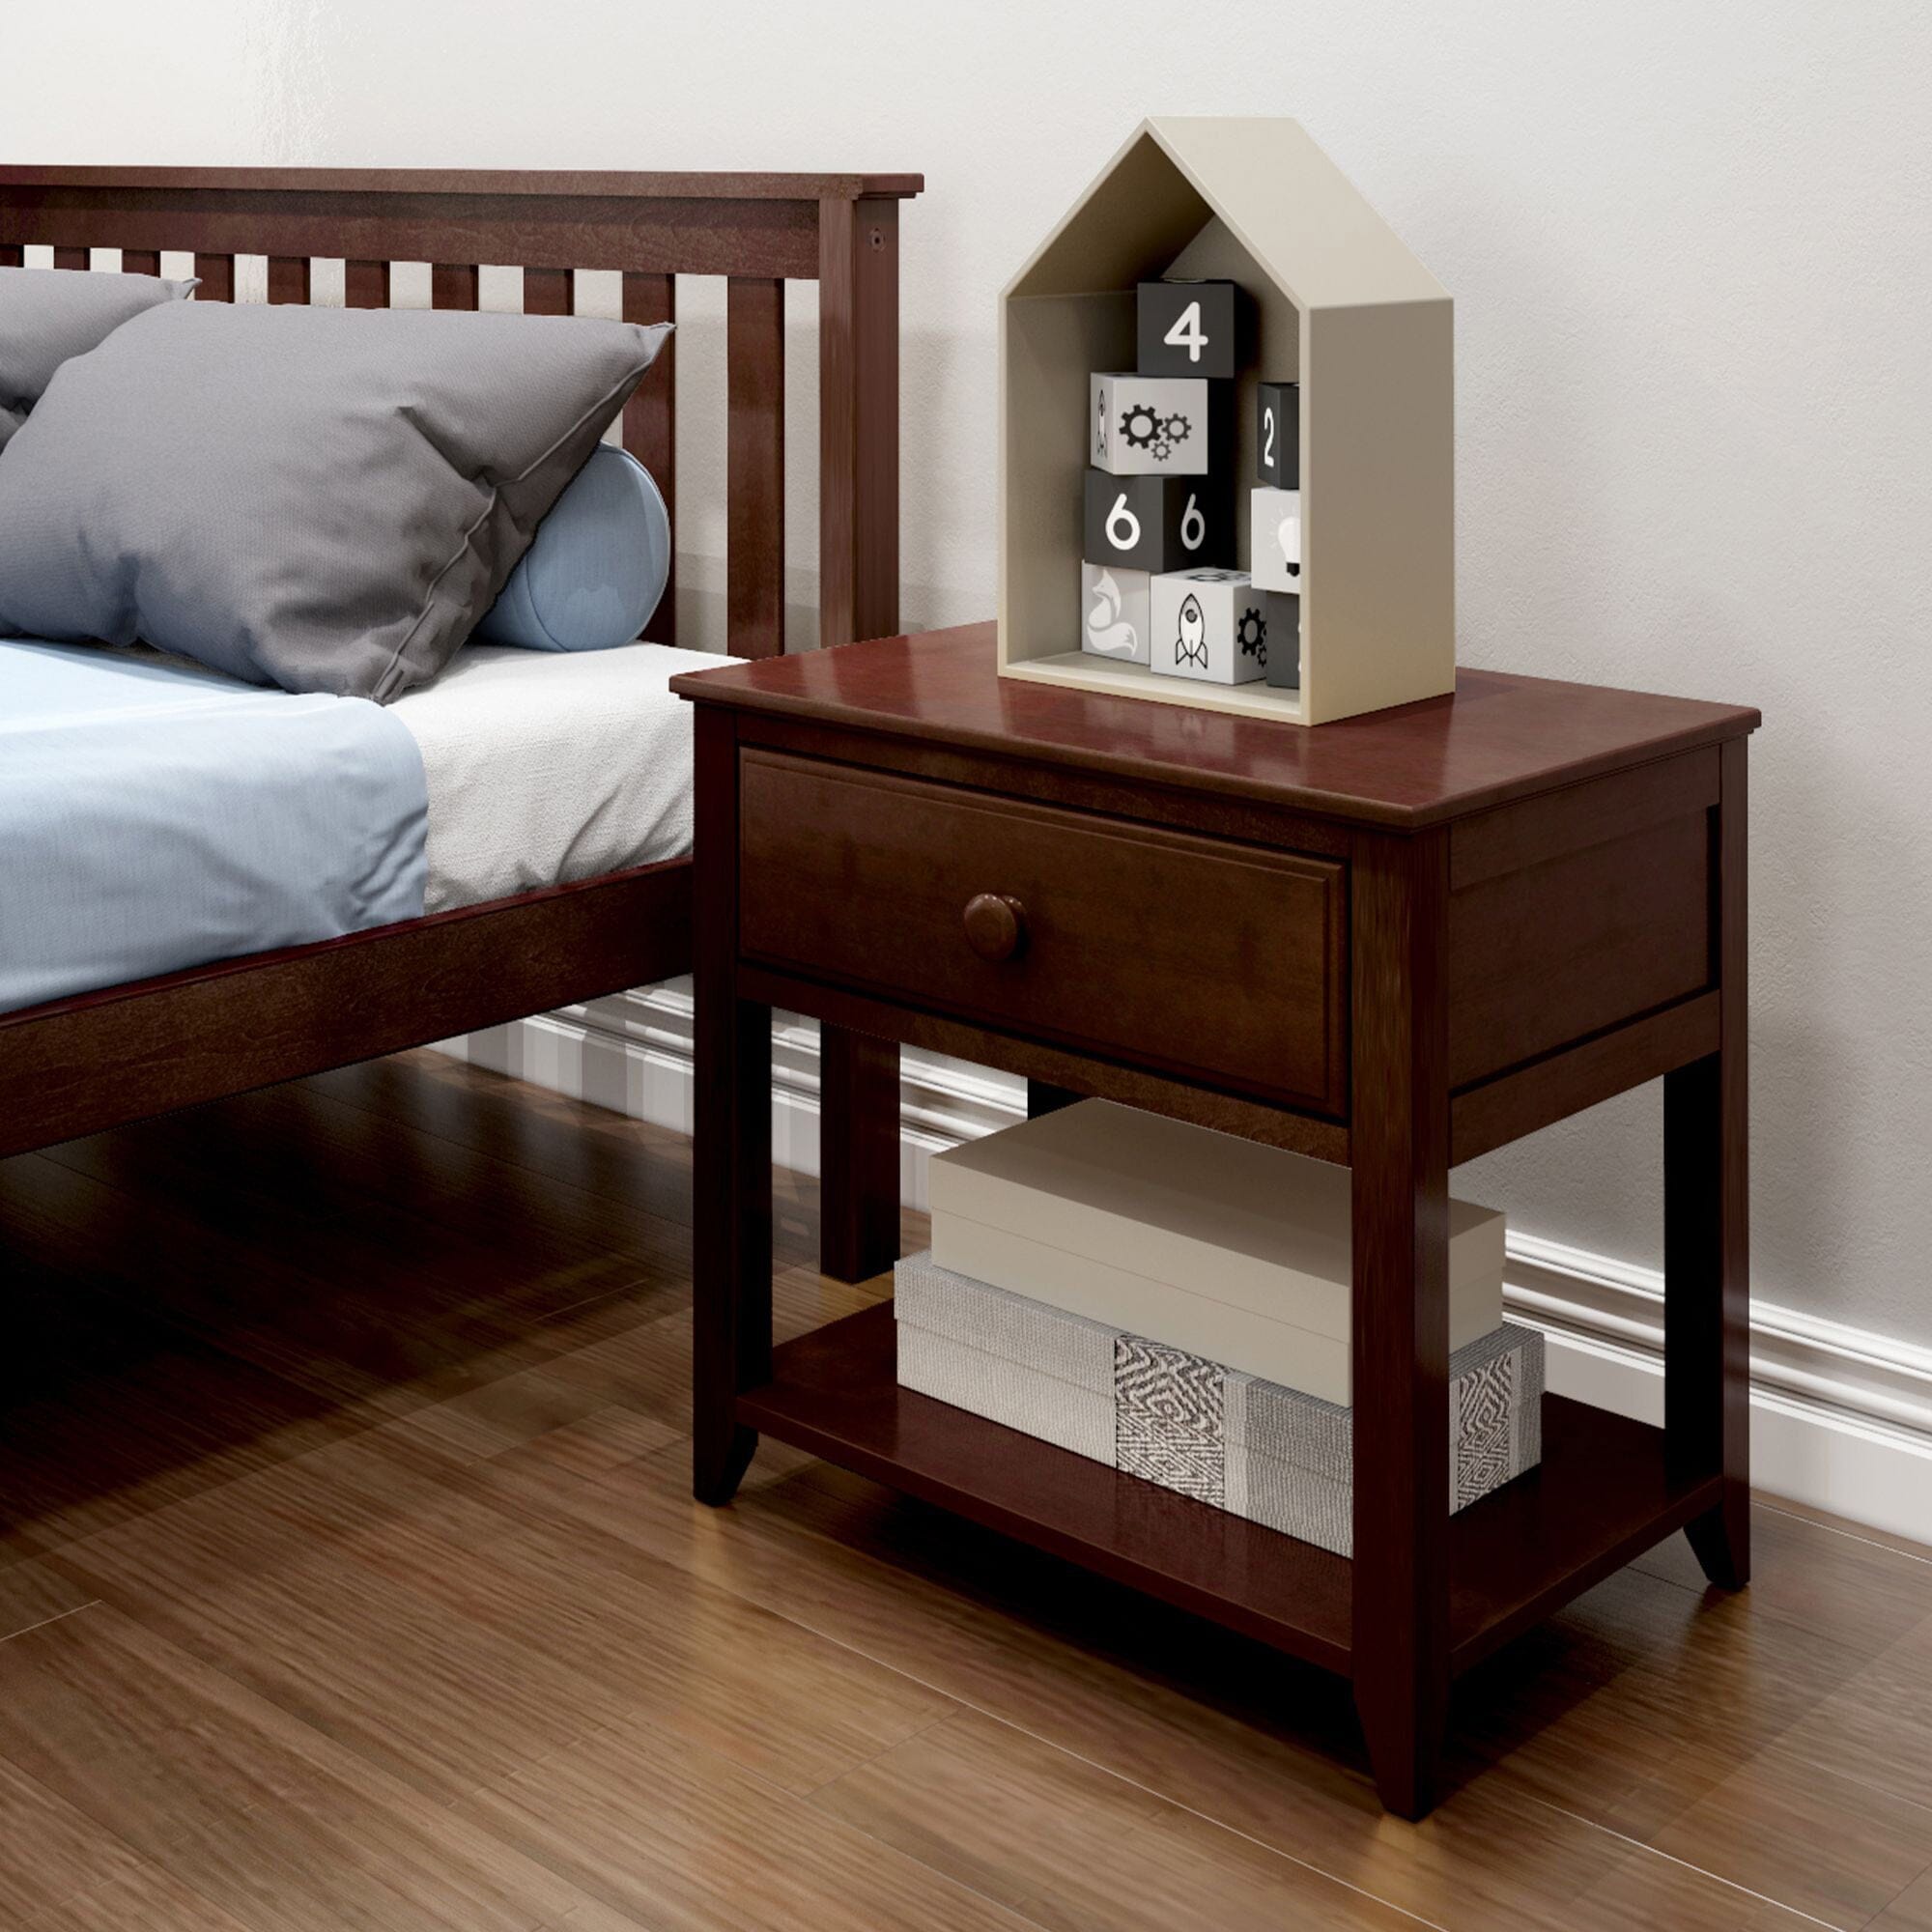 Image of Nightstand with Drawer and Shelf